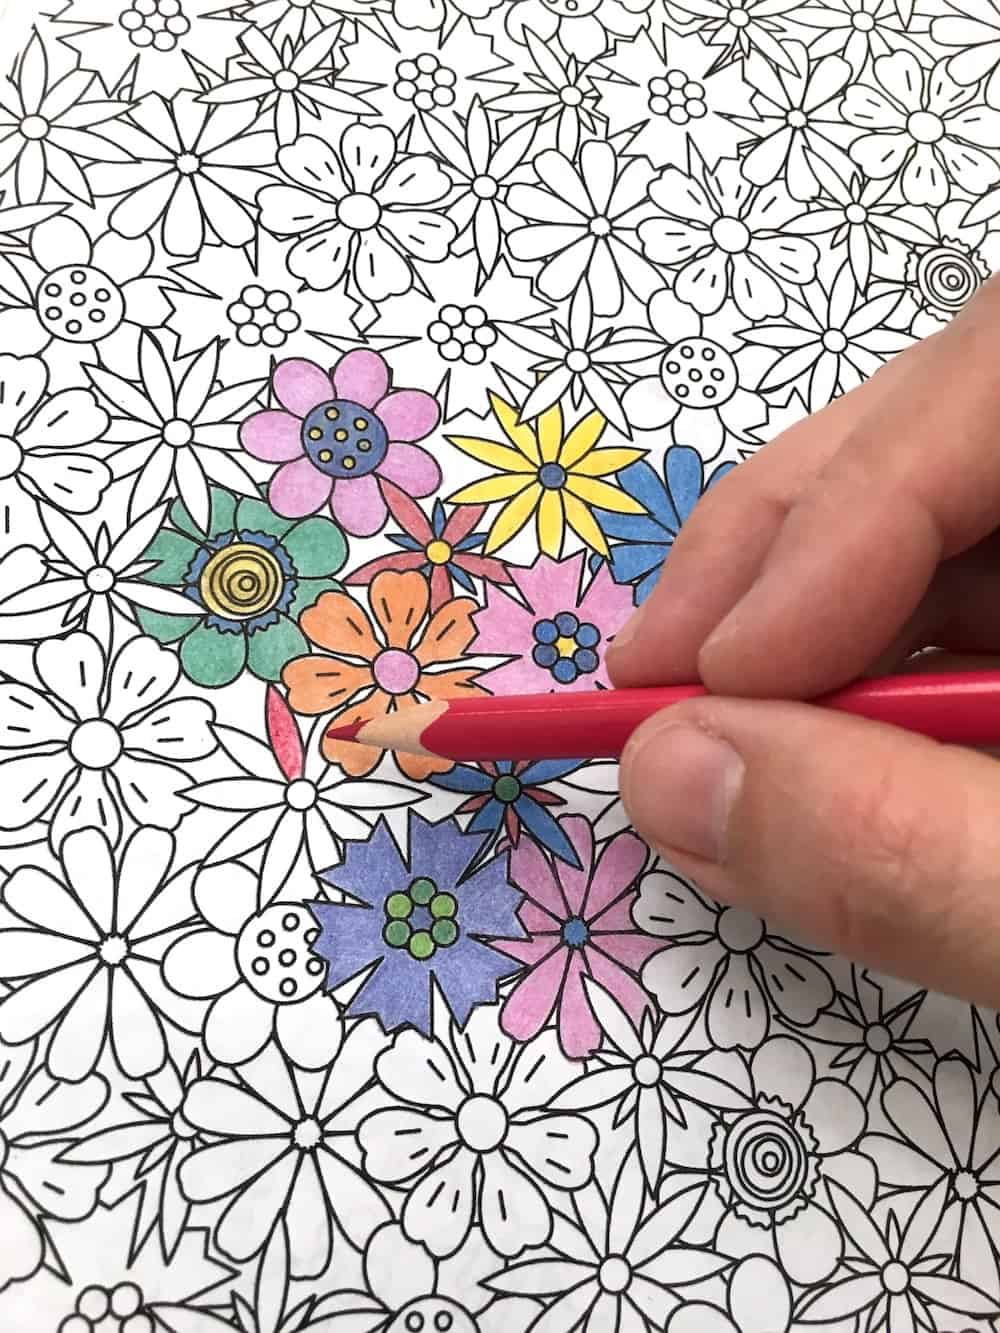 Coloring in a coloring page with colored pencils